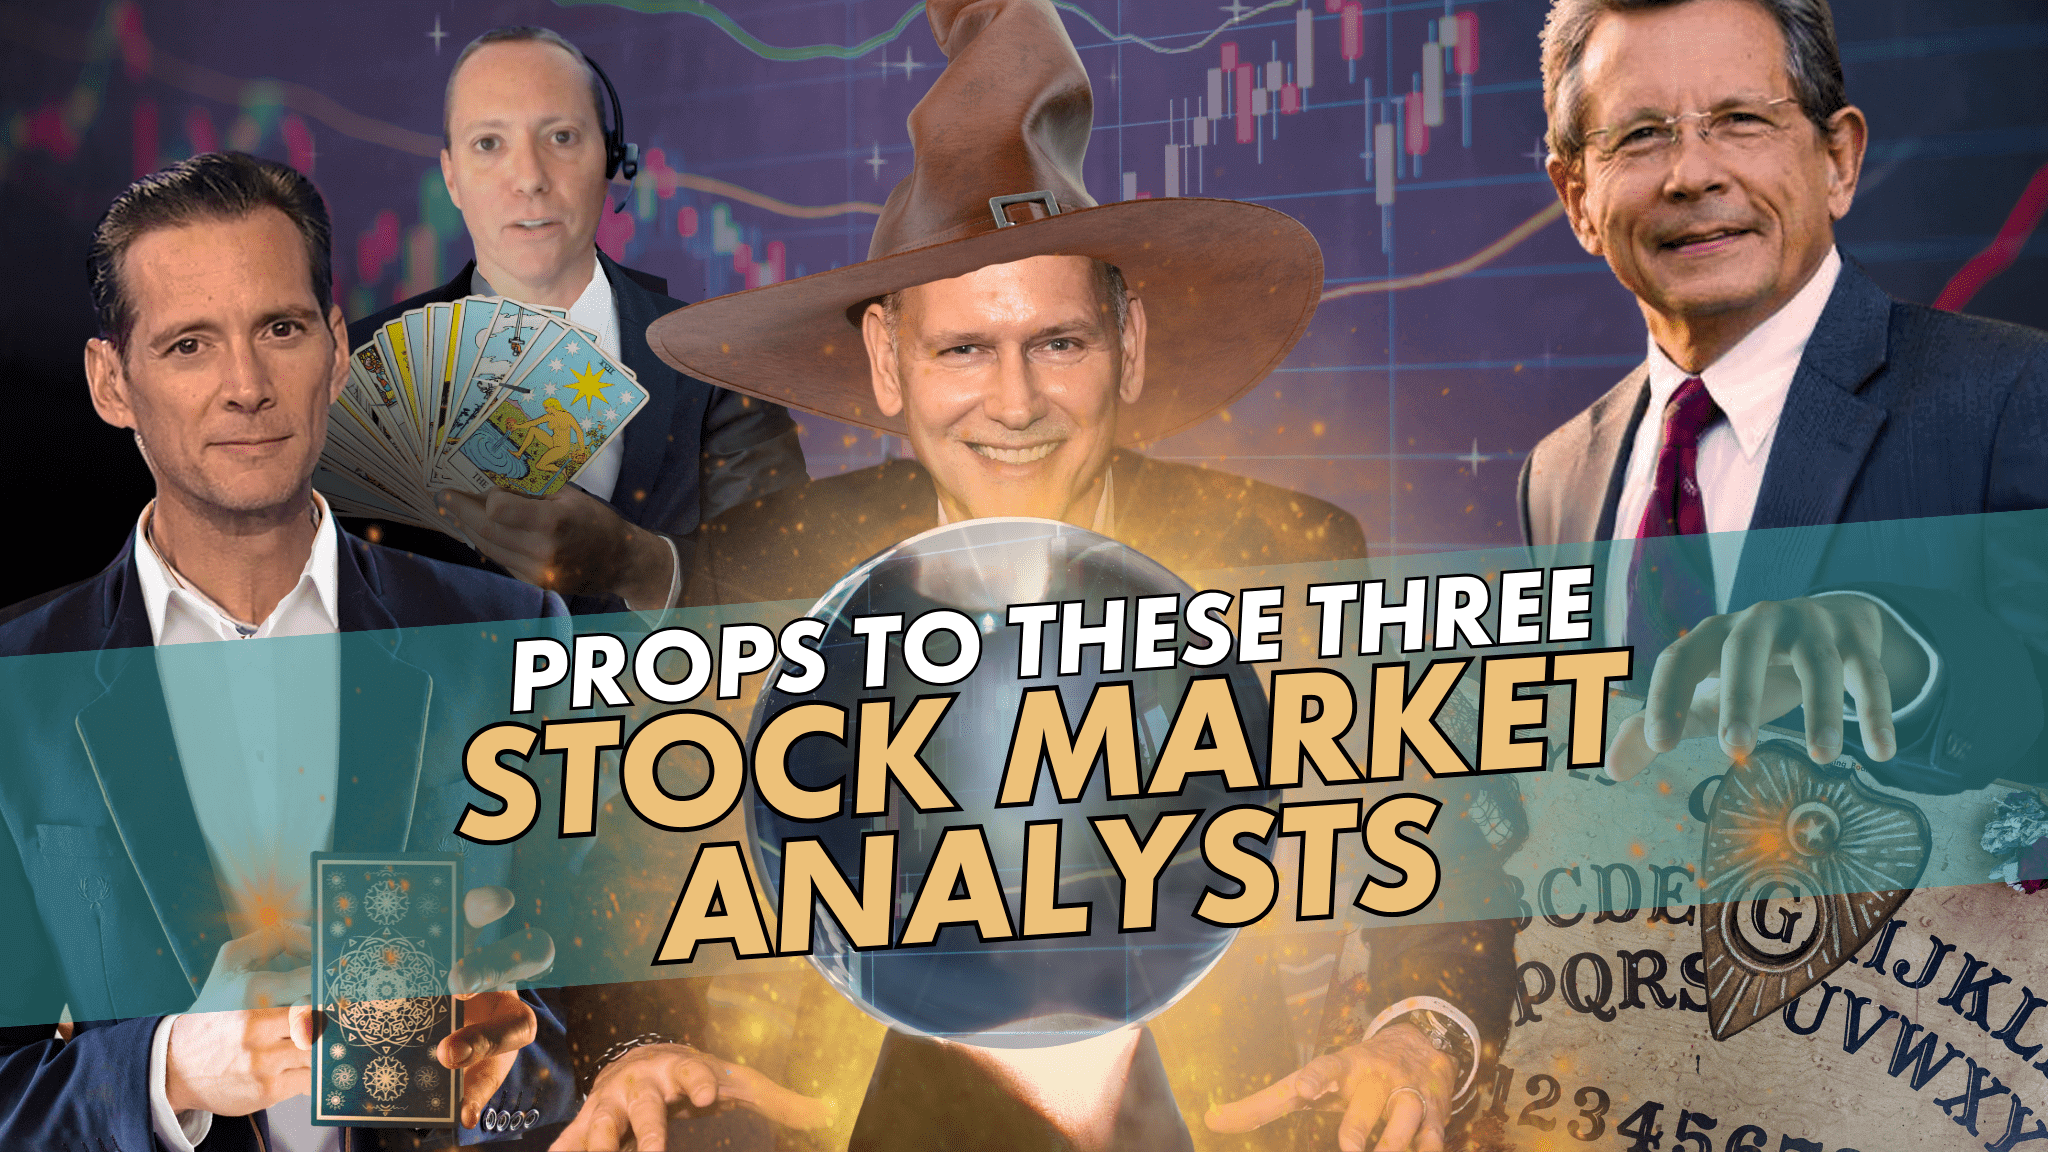 Props to these three stock market analysts